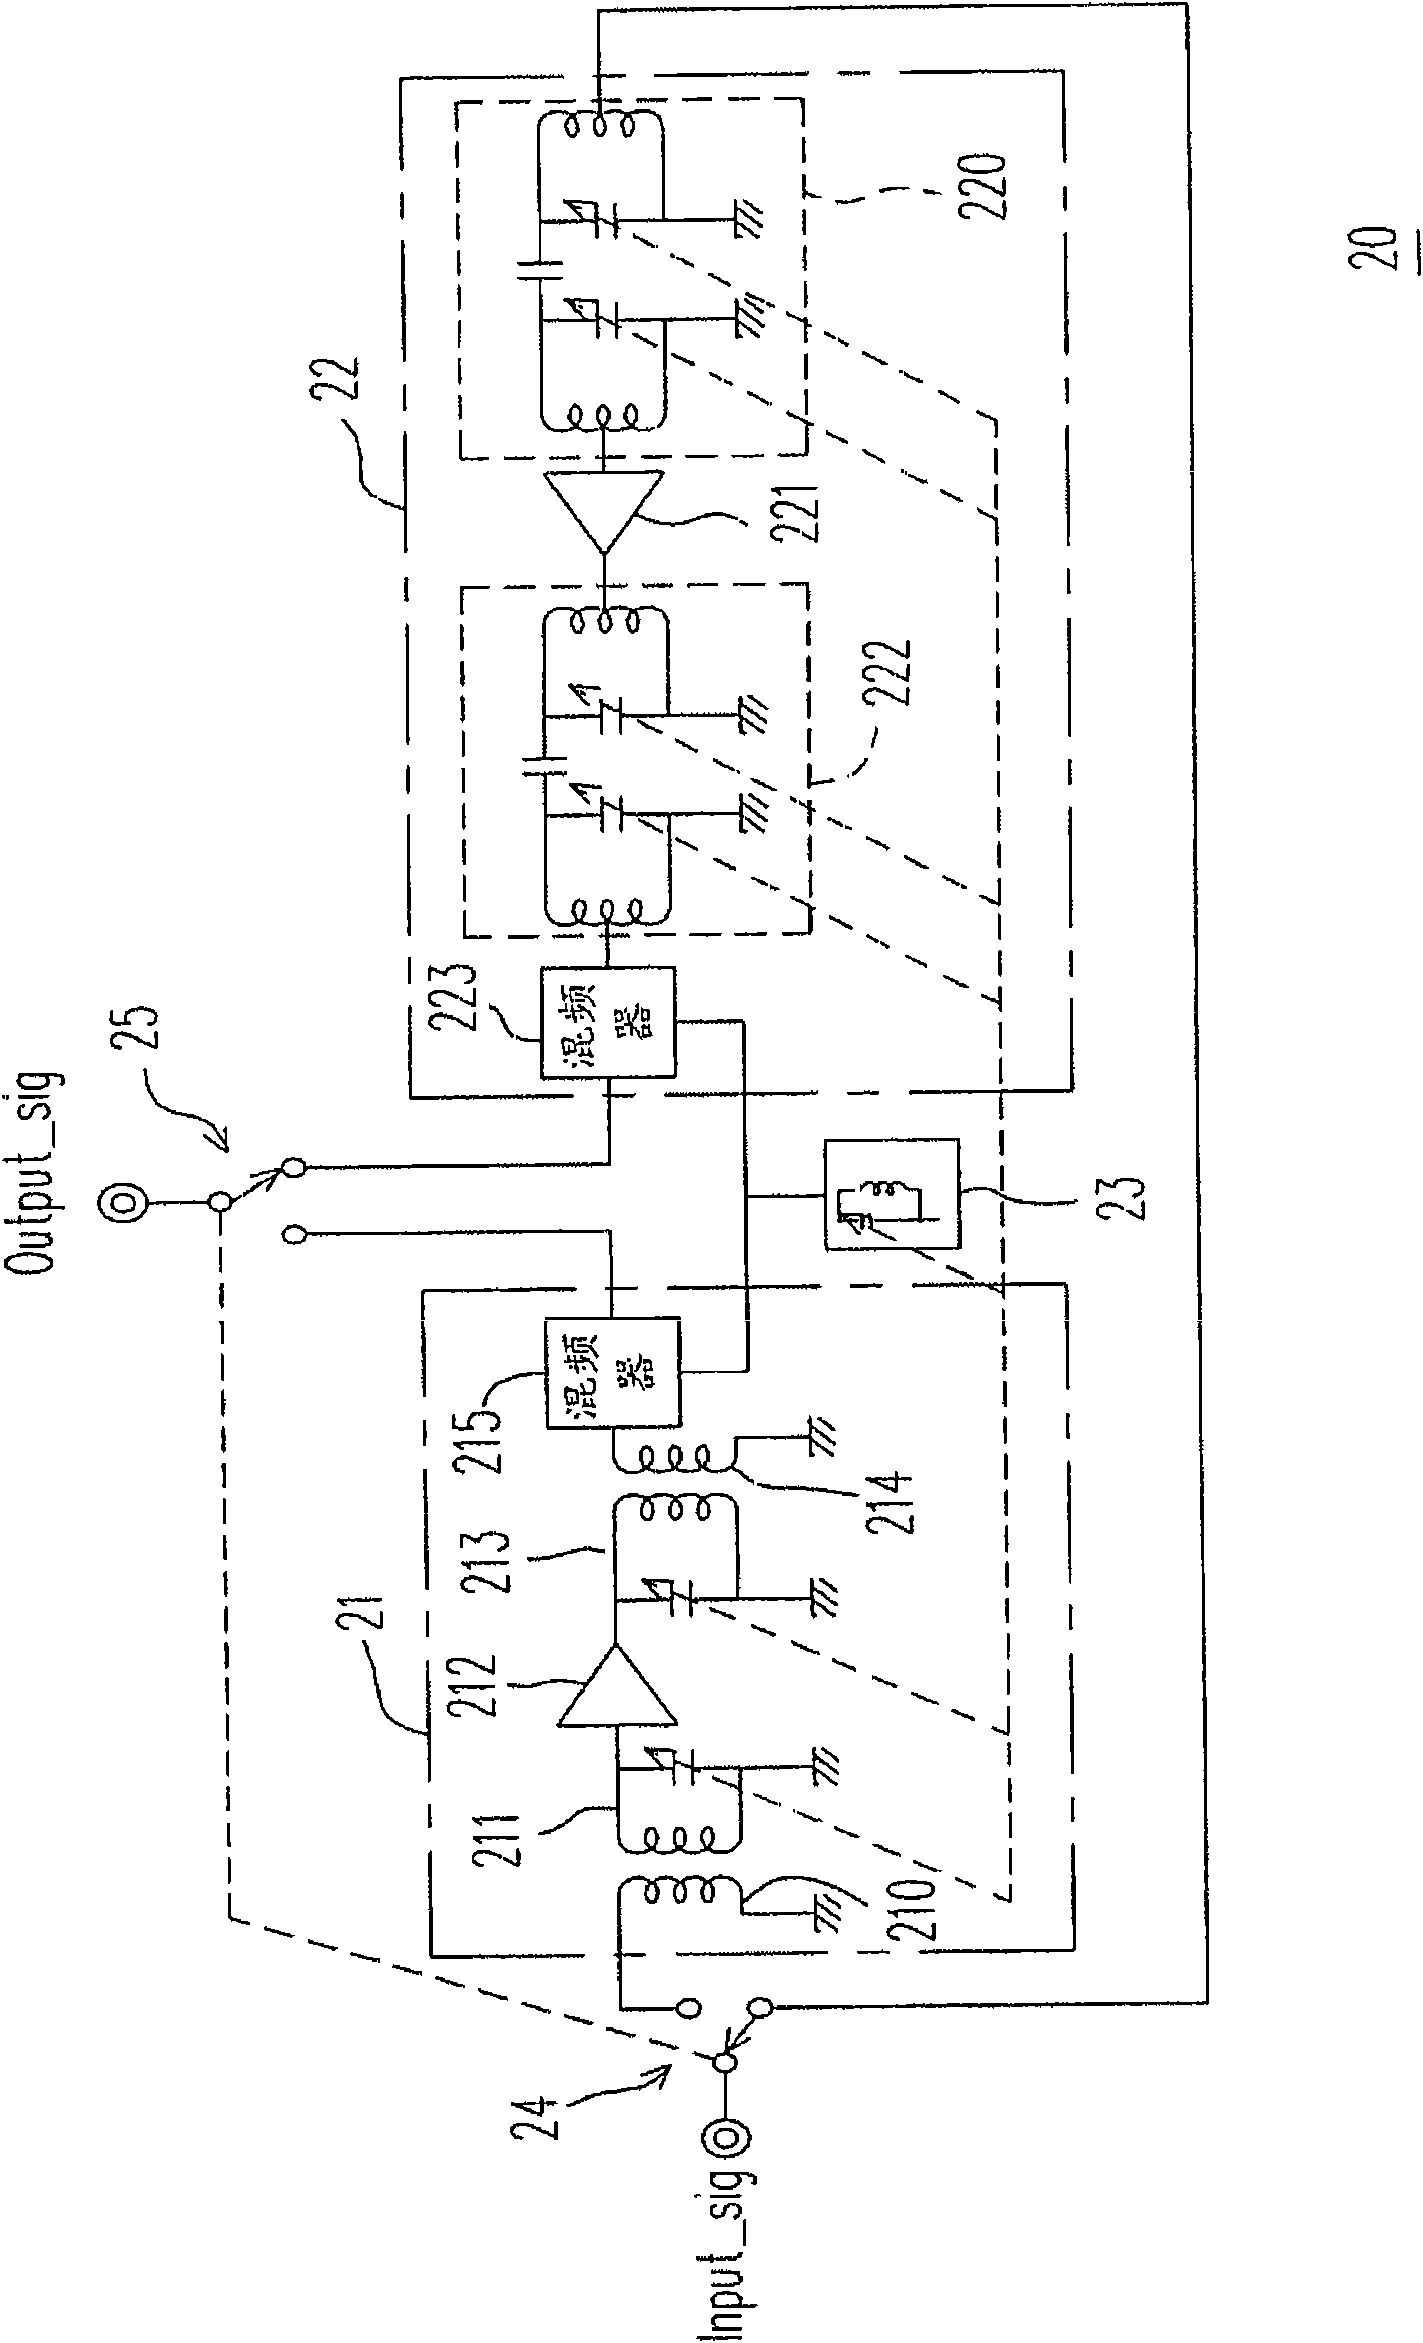 A coordinate tunable filter and a wireless communication front end circuit